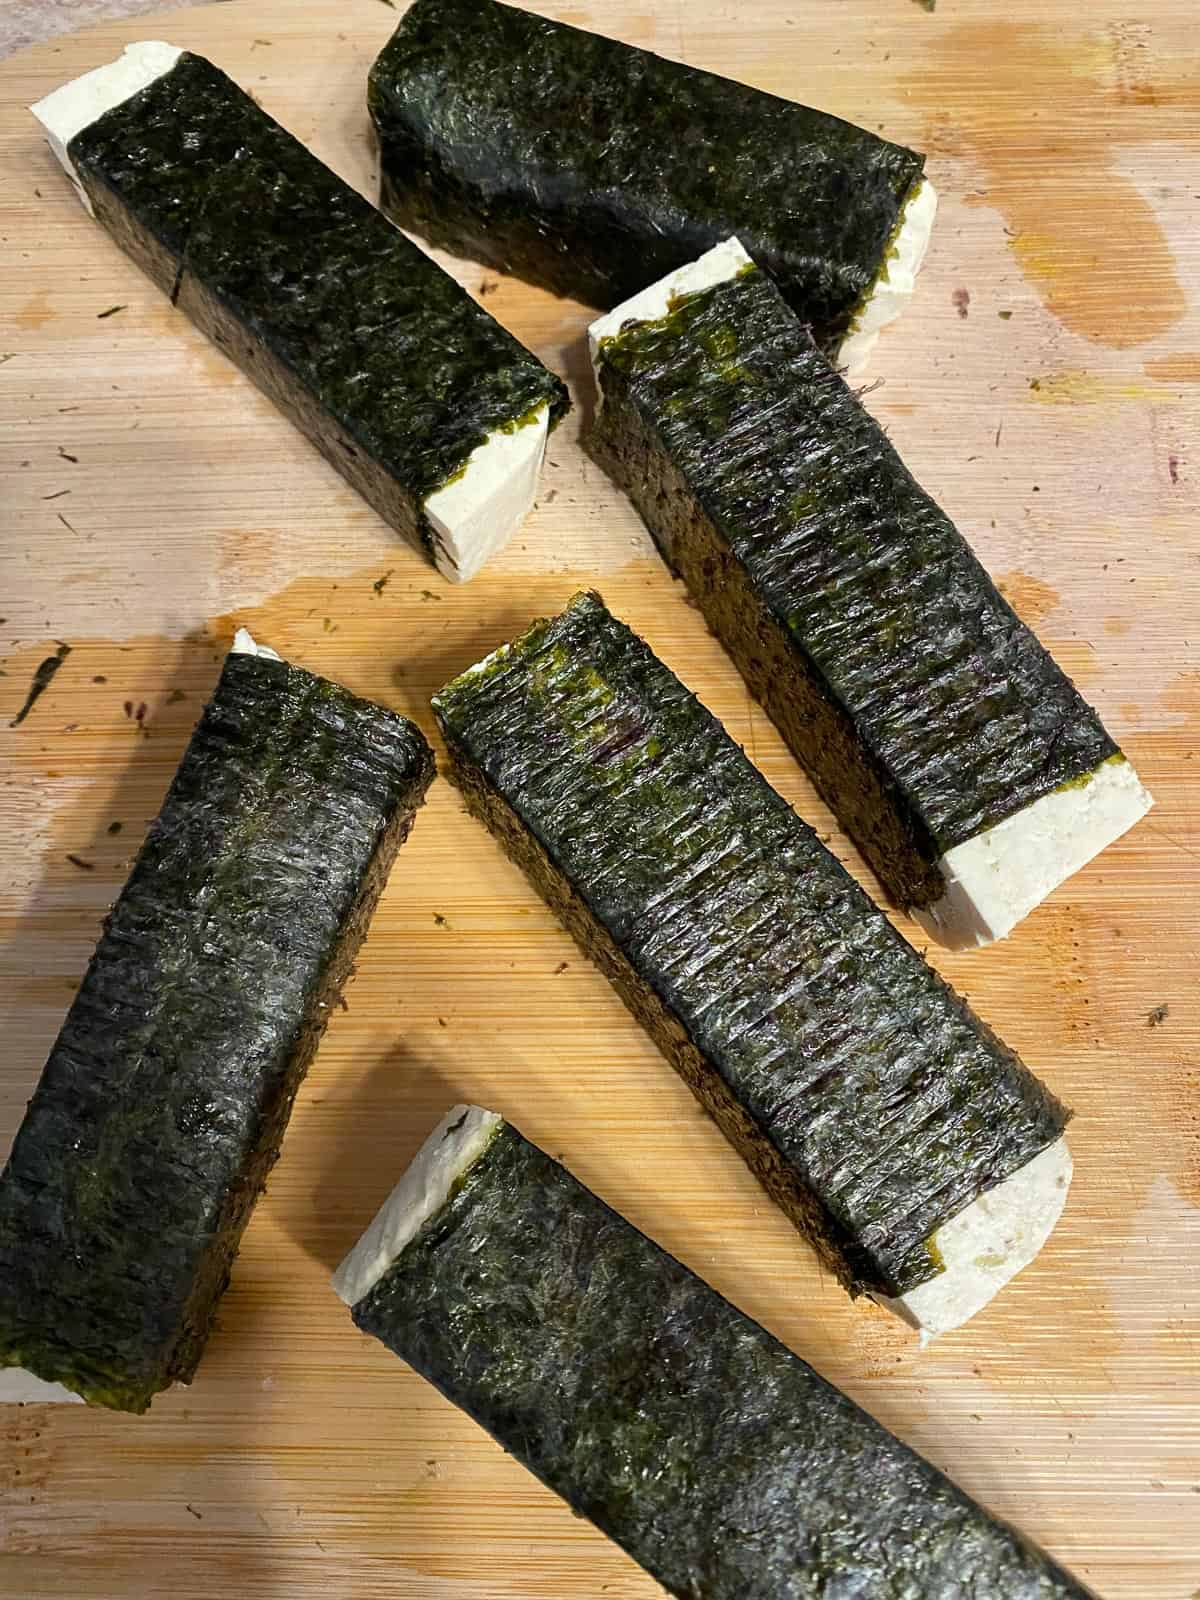 process shot showing several rolled up tofu pieces with nori sheets